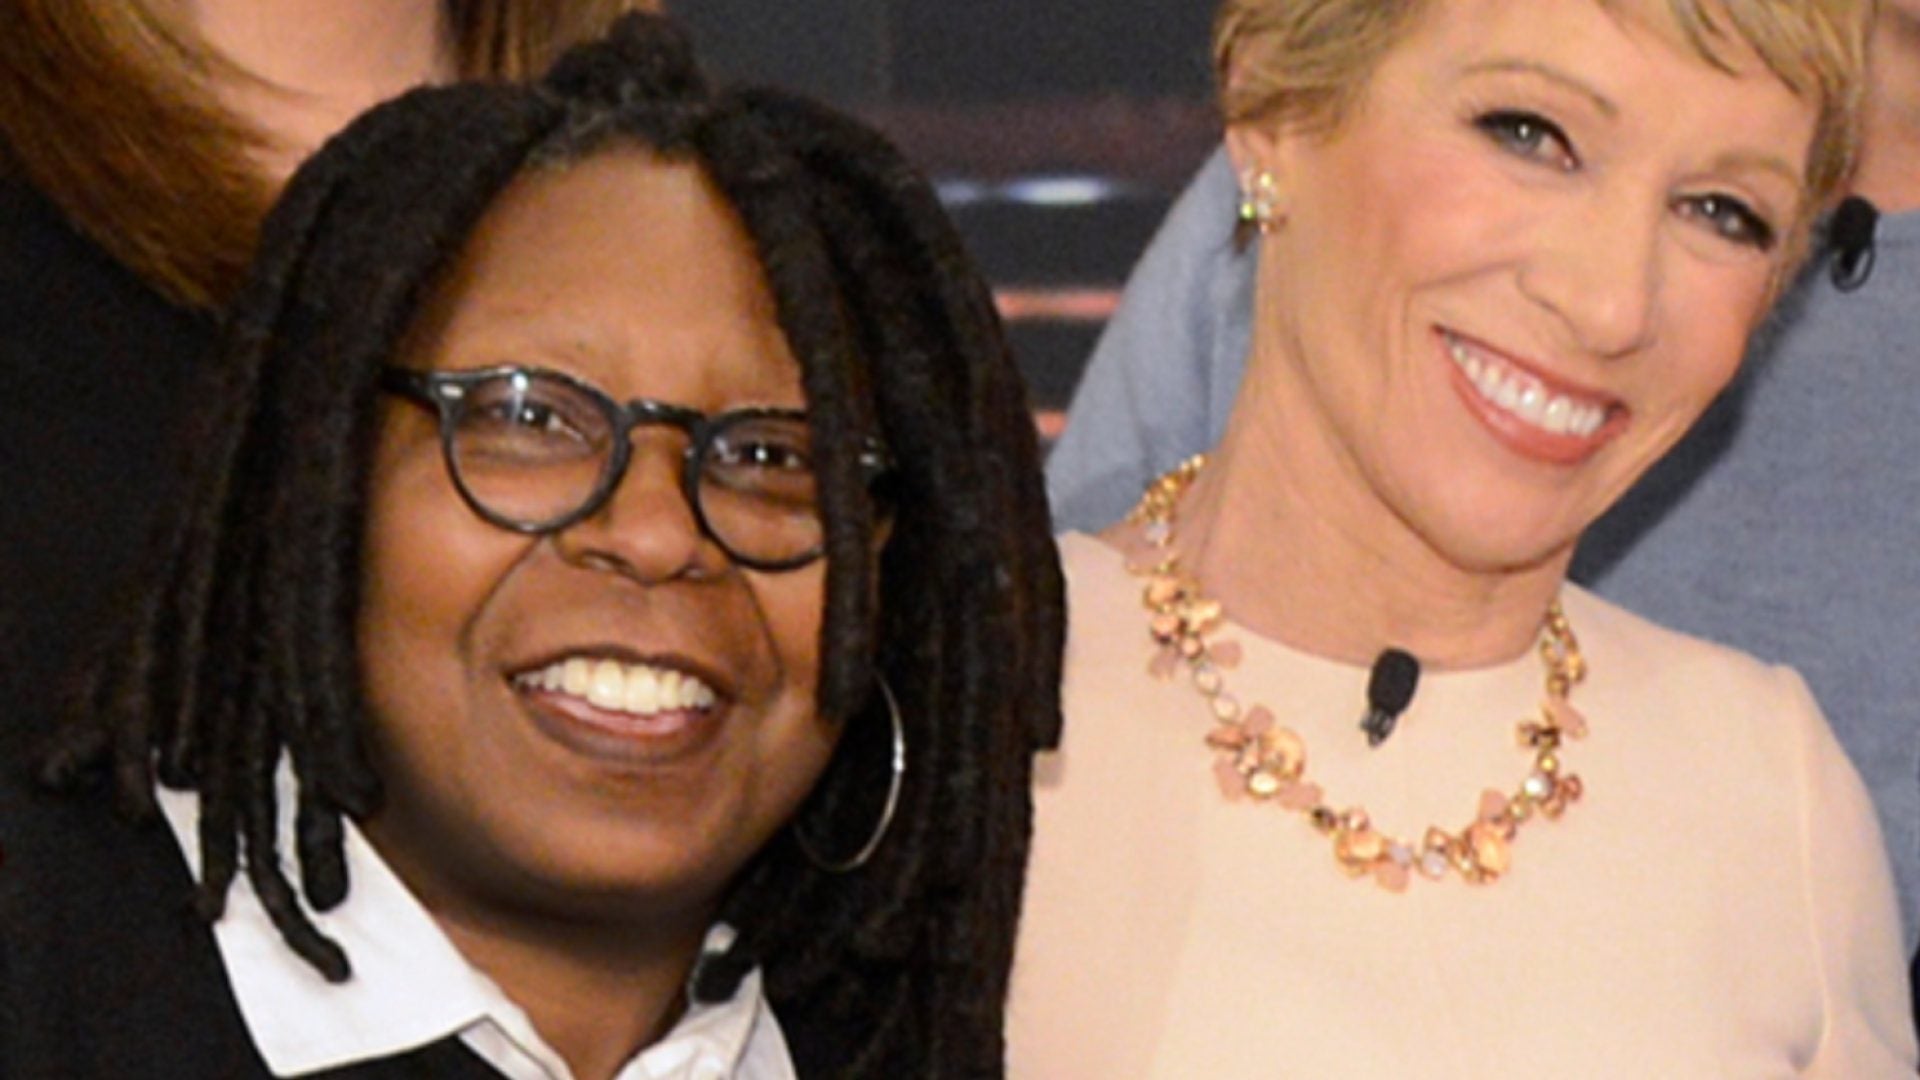 Barbara Corcoran Apologizes For Body Shaming Whoopi Goldberg On ‘The View’